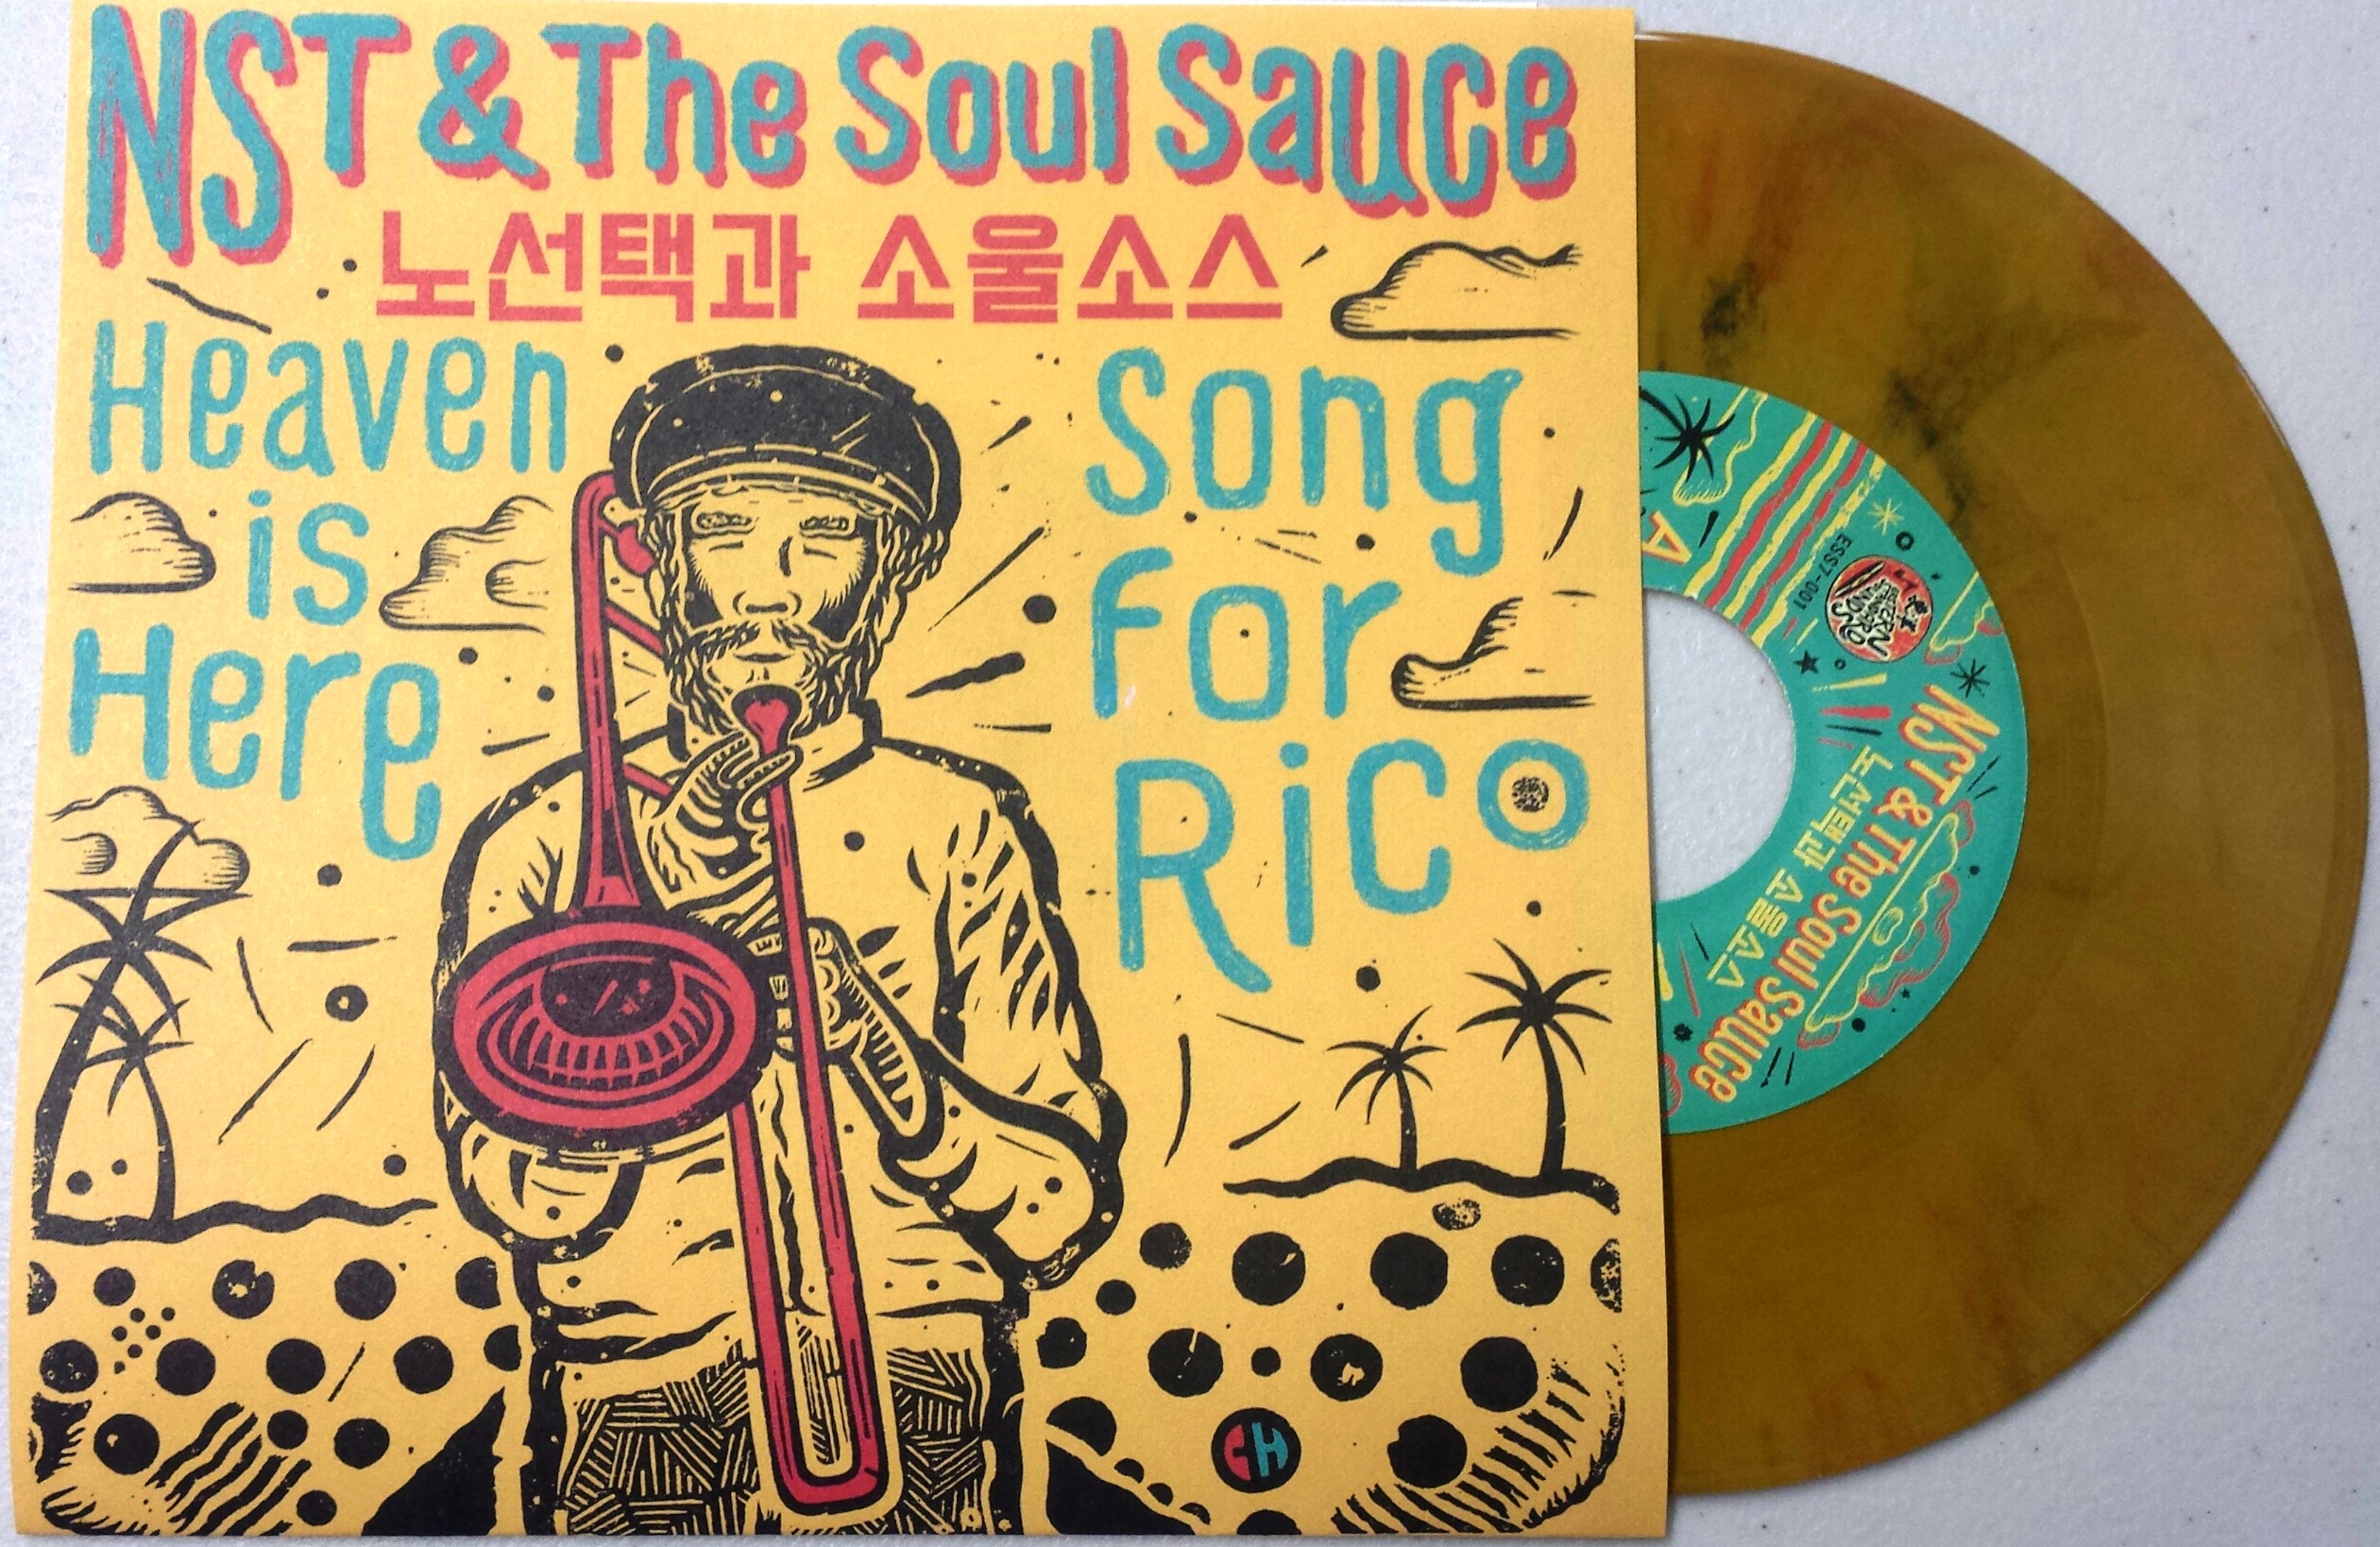 NST & The Soul Sauce/SONG FOR RICO 7"